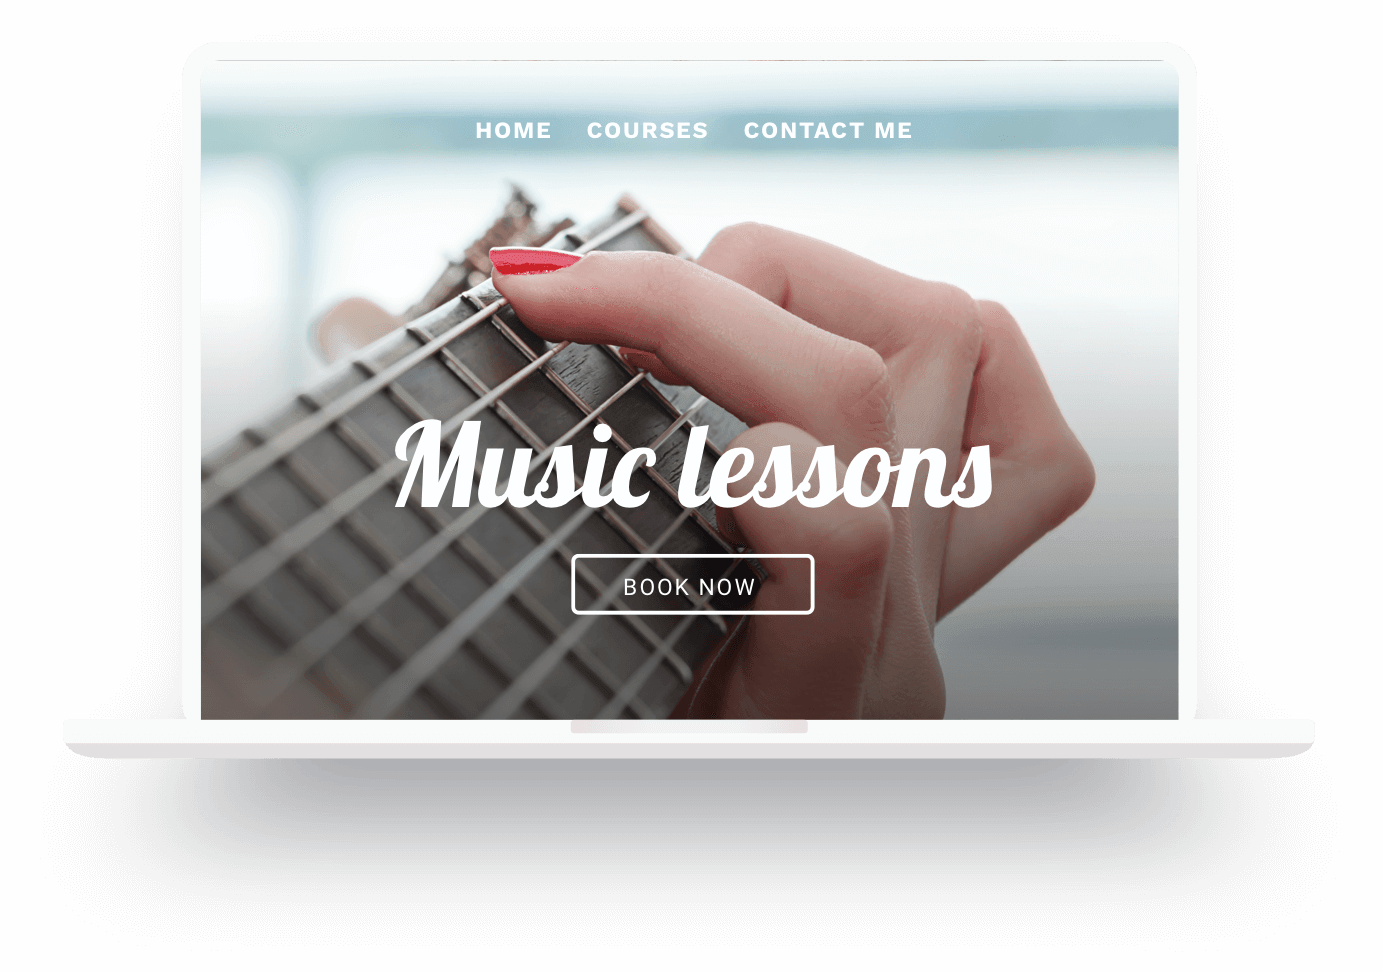 Example of a music teacher's website built with Jimdo